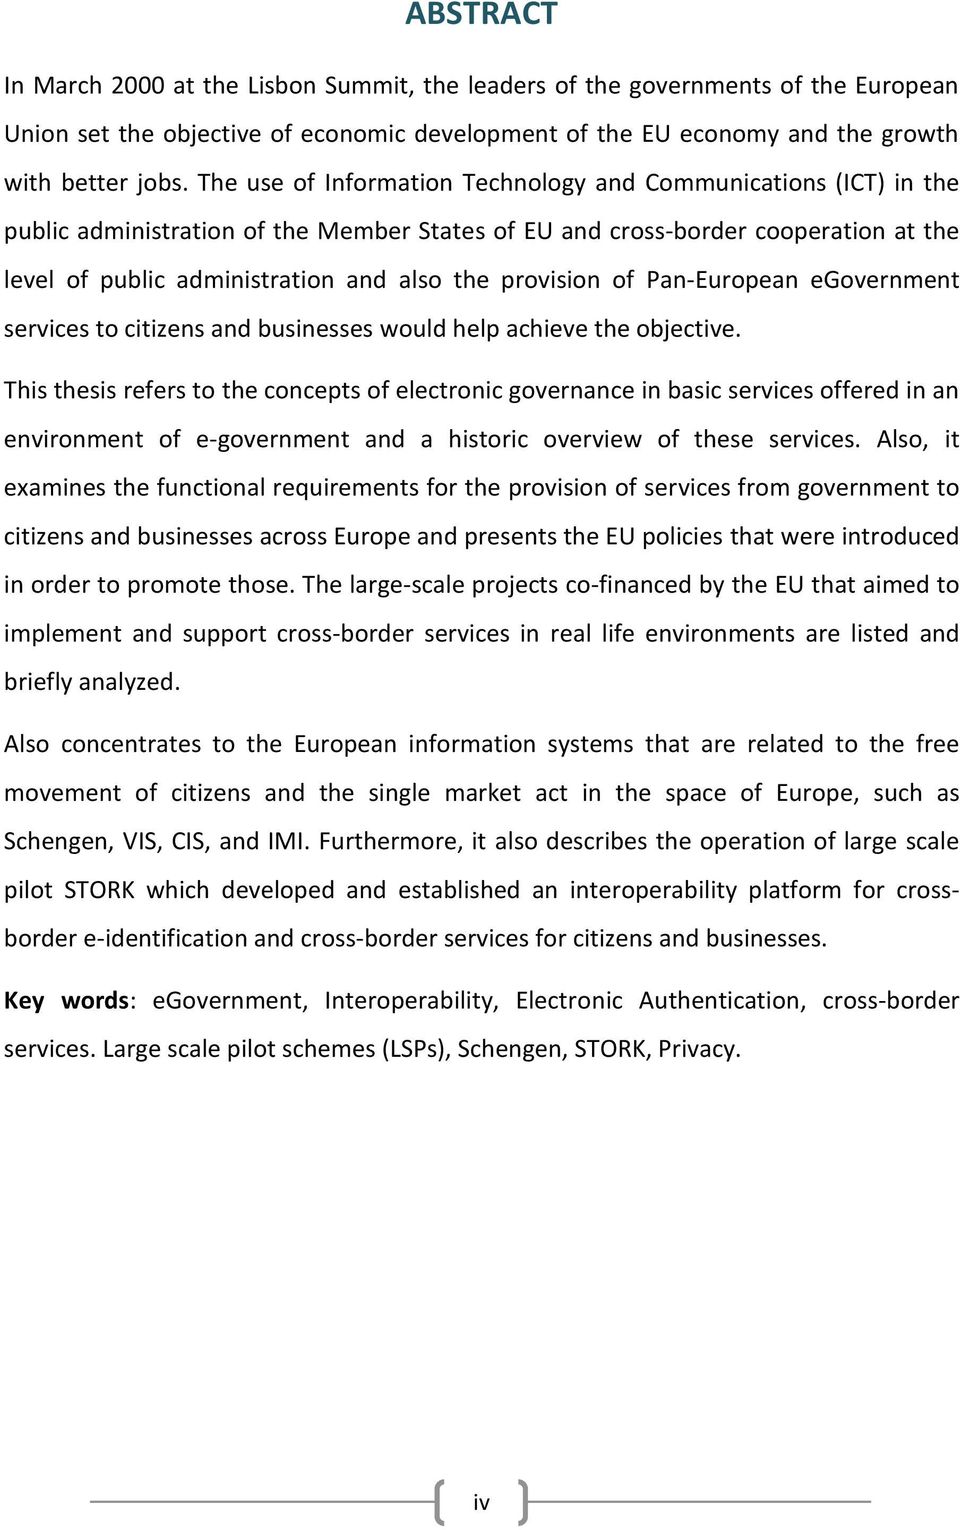 provision of Pan-European egovernment services to citizens and businesses would help achieve the objective.